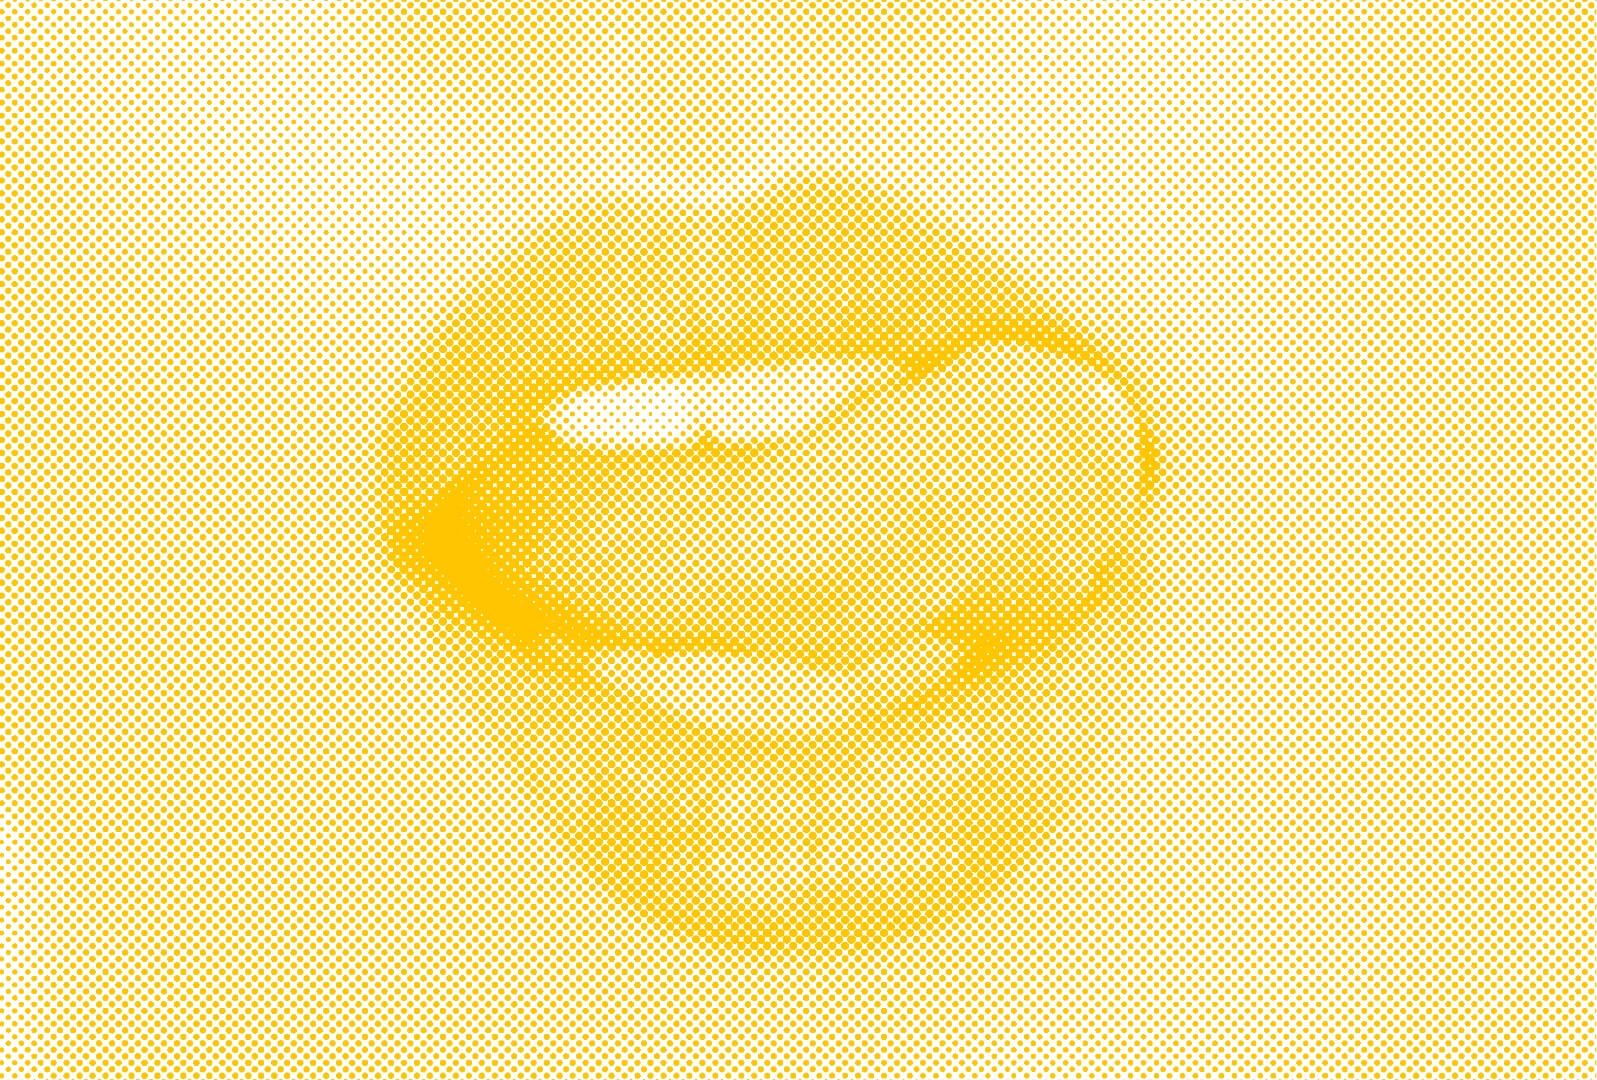 image of some lips